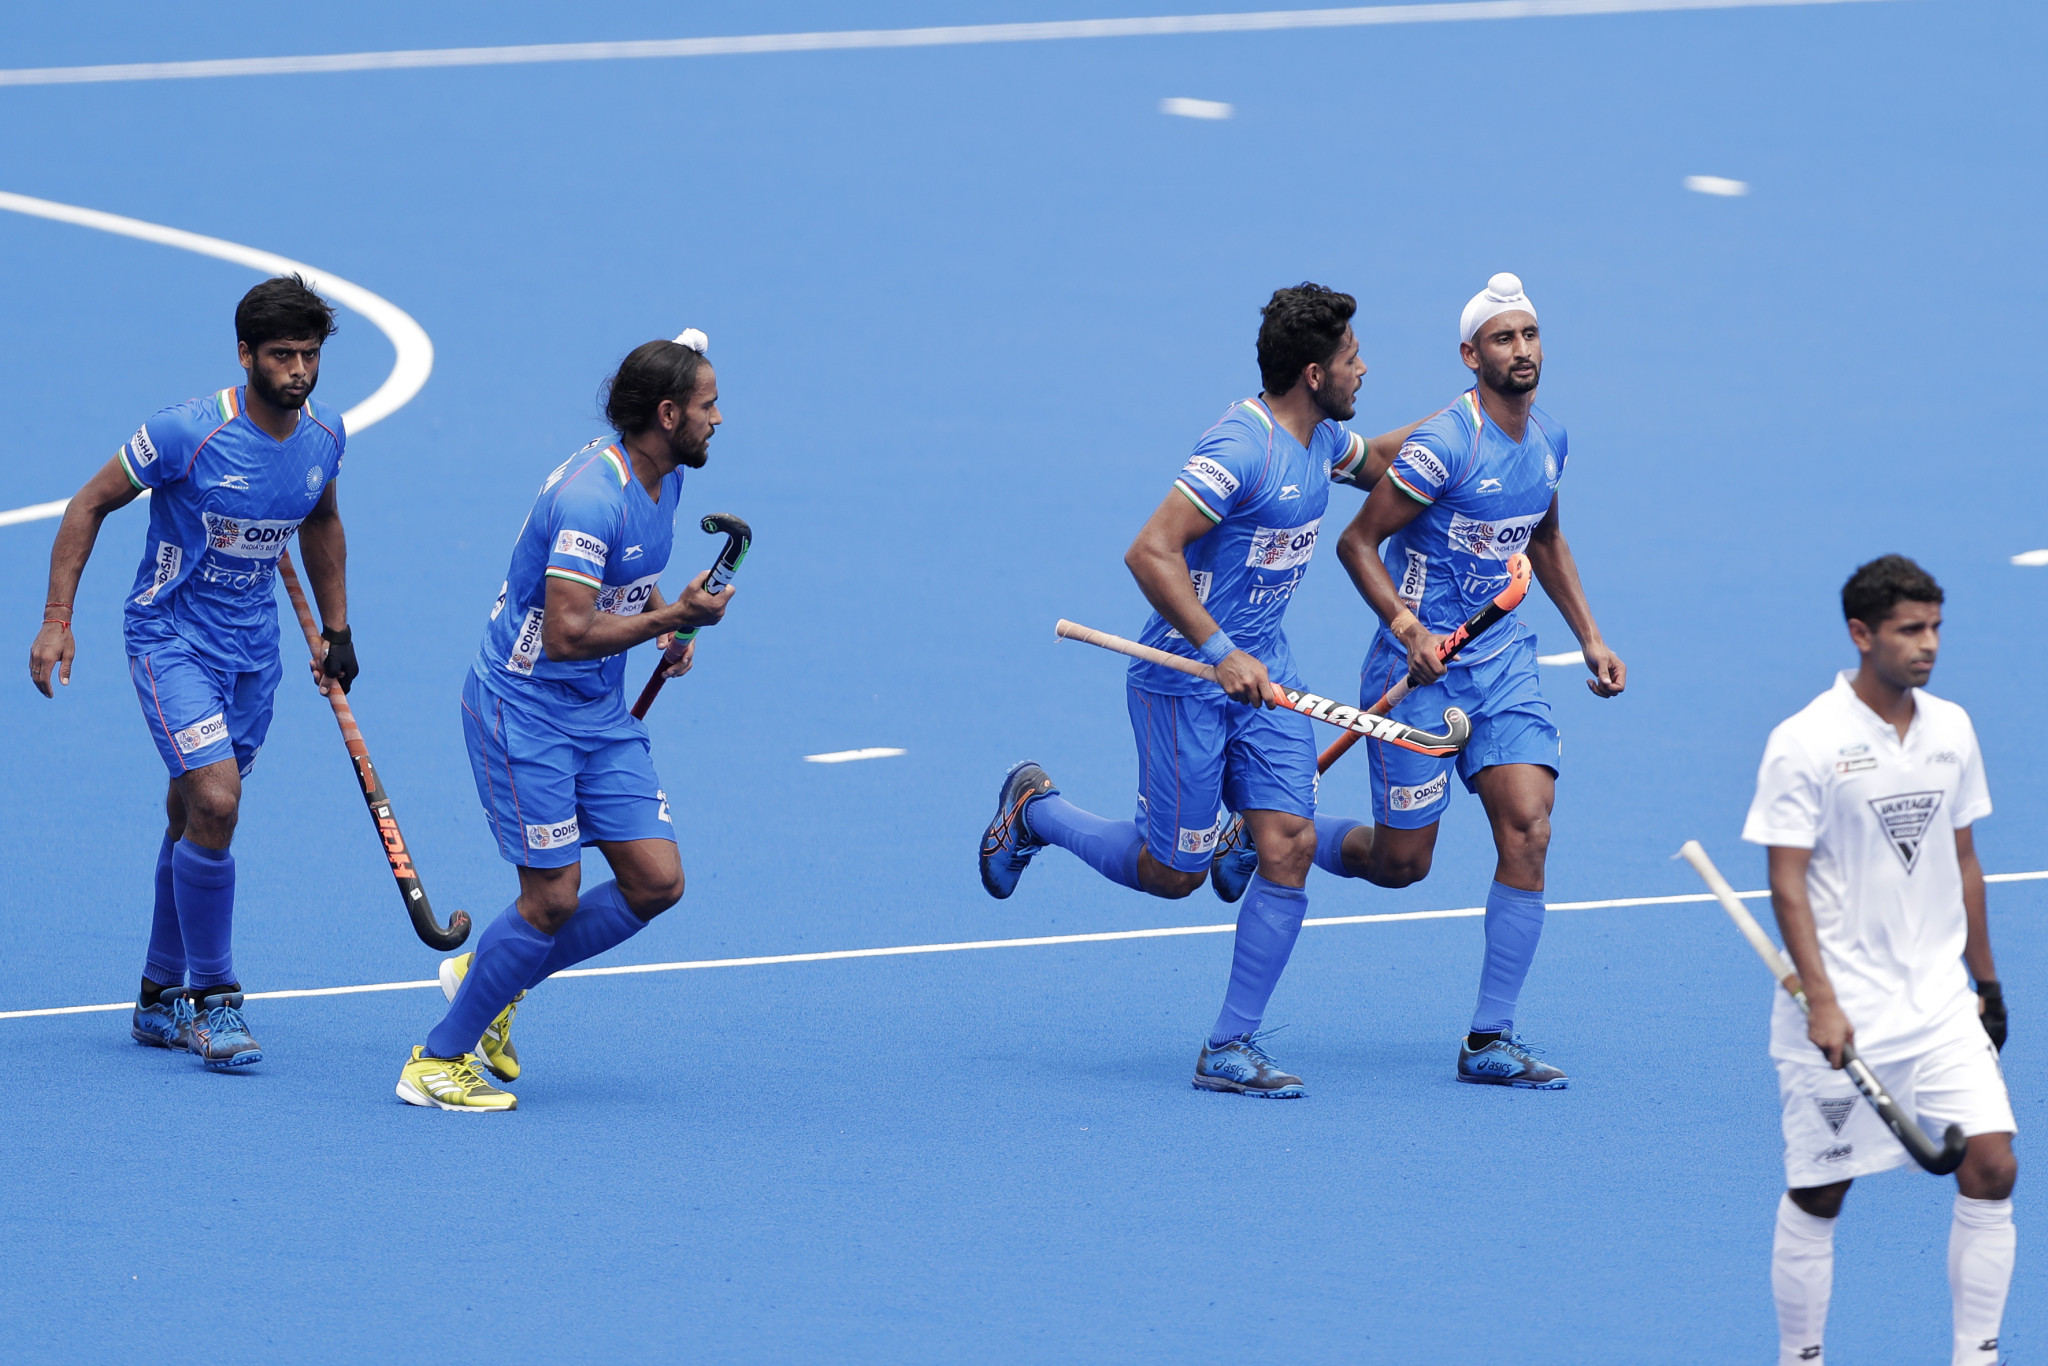 India's opponent for the two-leg Olympic hockey qualifier should be confirmed next Monday ©Getty Images